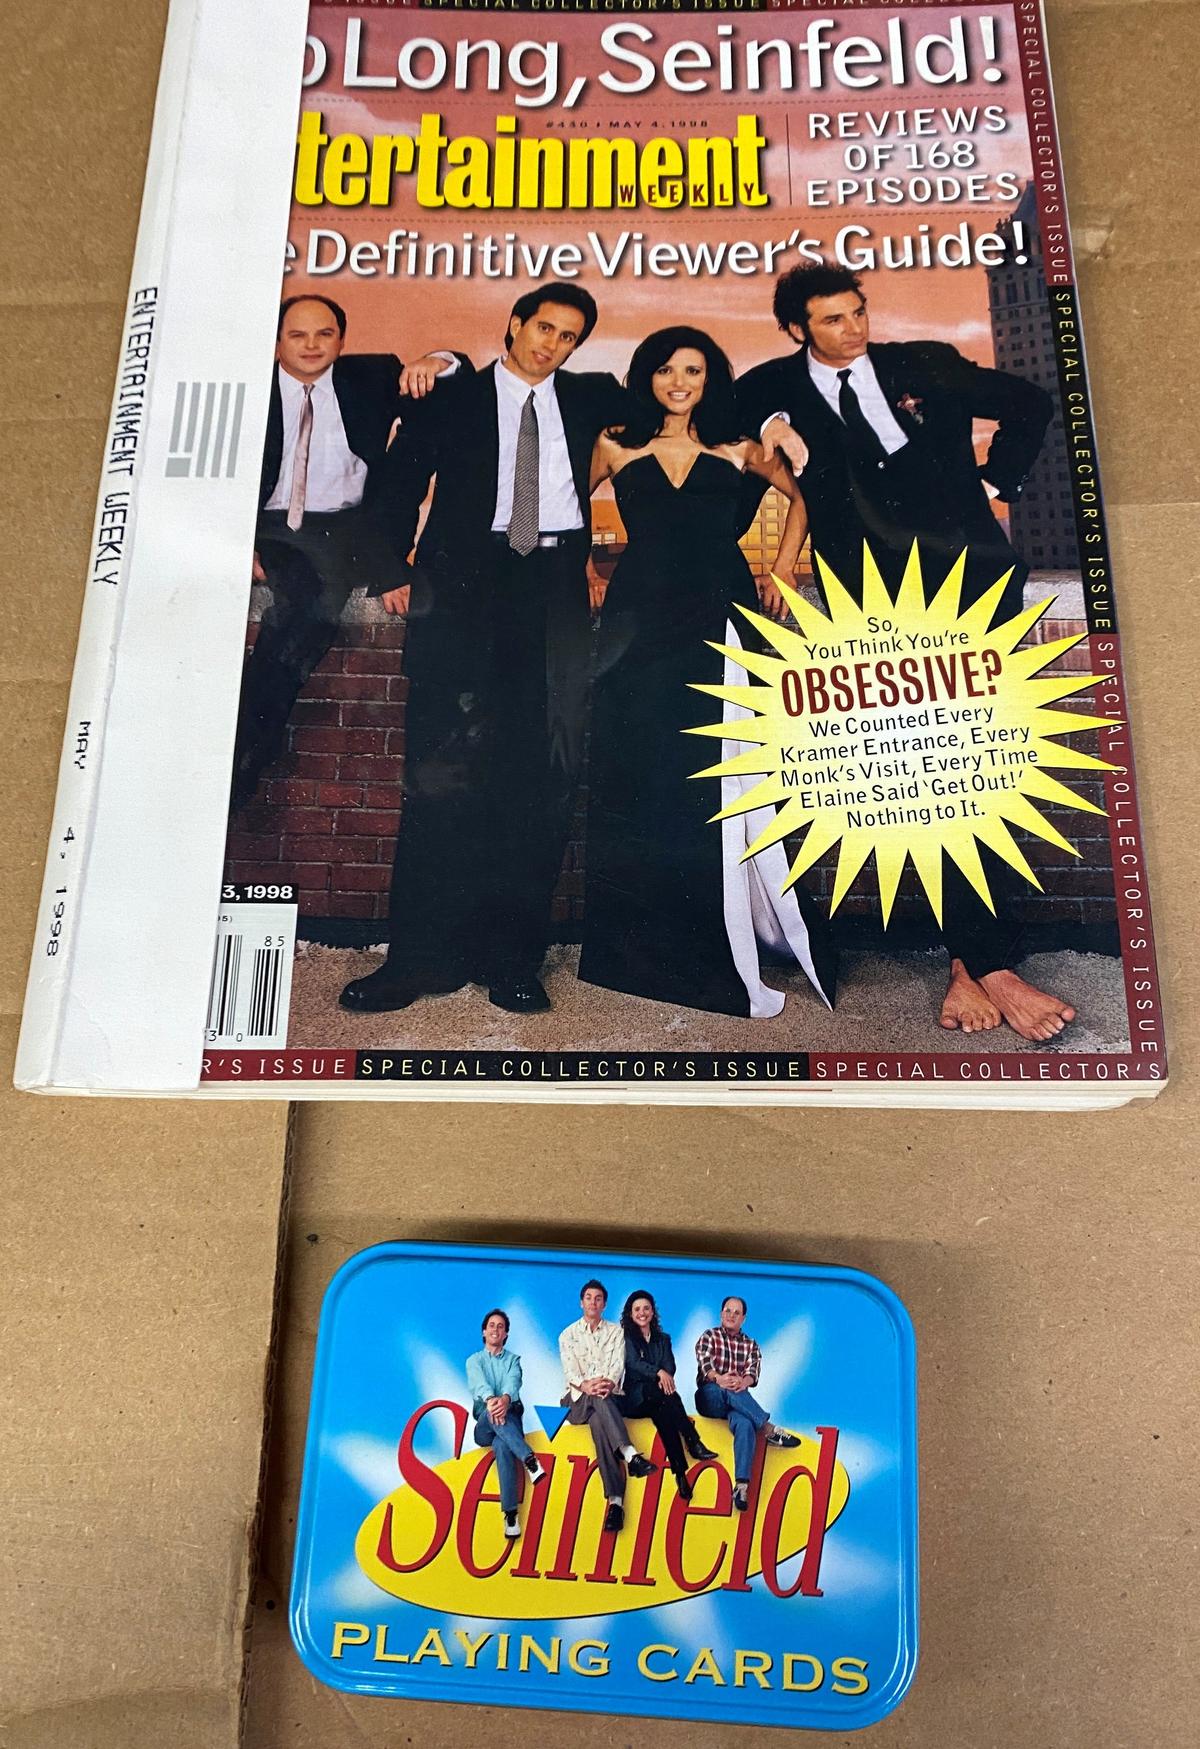 Lot of (2) Unique "Seinfeld" Collectables. (1) Card Set and (1) Entertainment Magazine reviewing 168